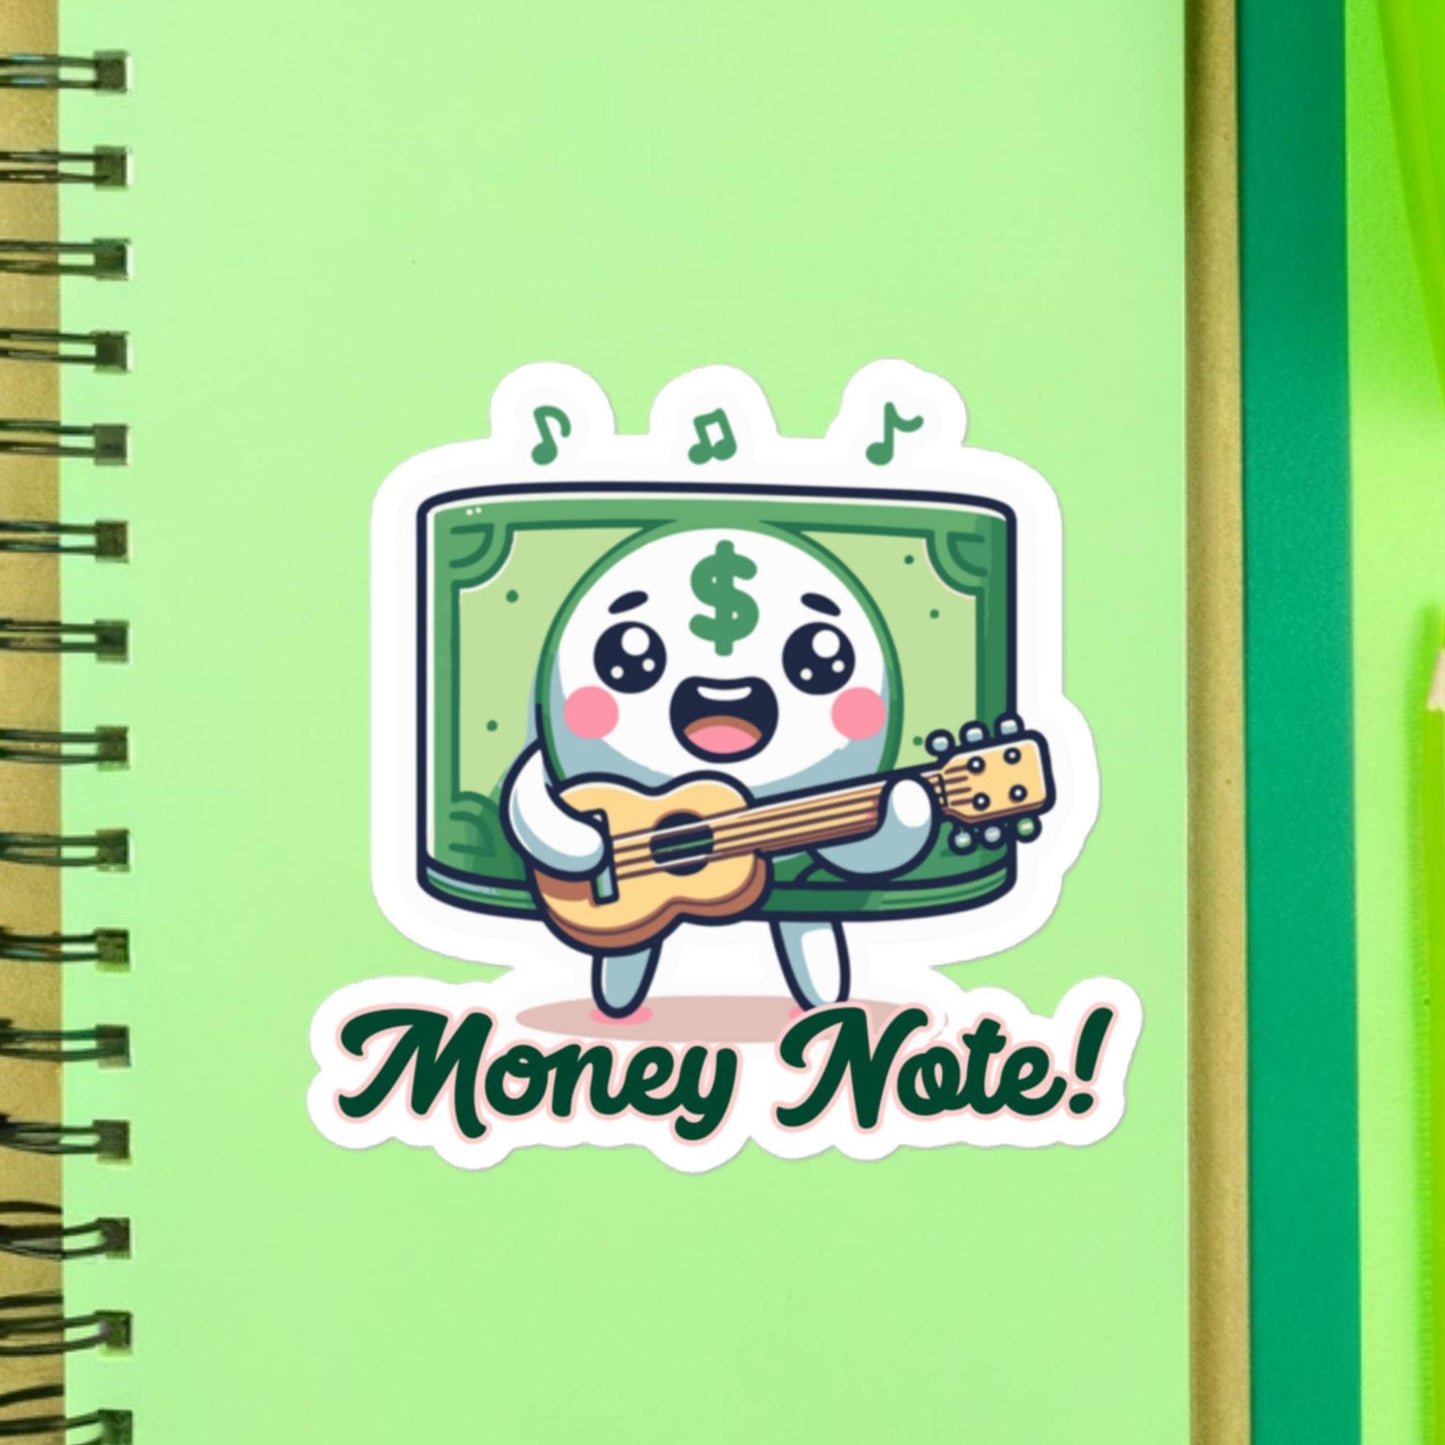 Money Note! Dollar Bill playing the guitar hits the money note! Fun musician stickersBubble-free stickers